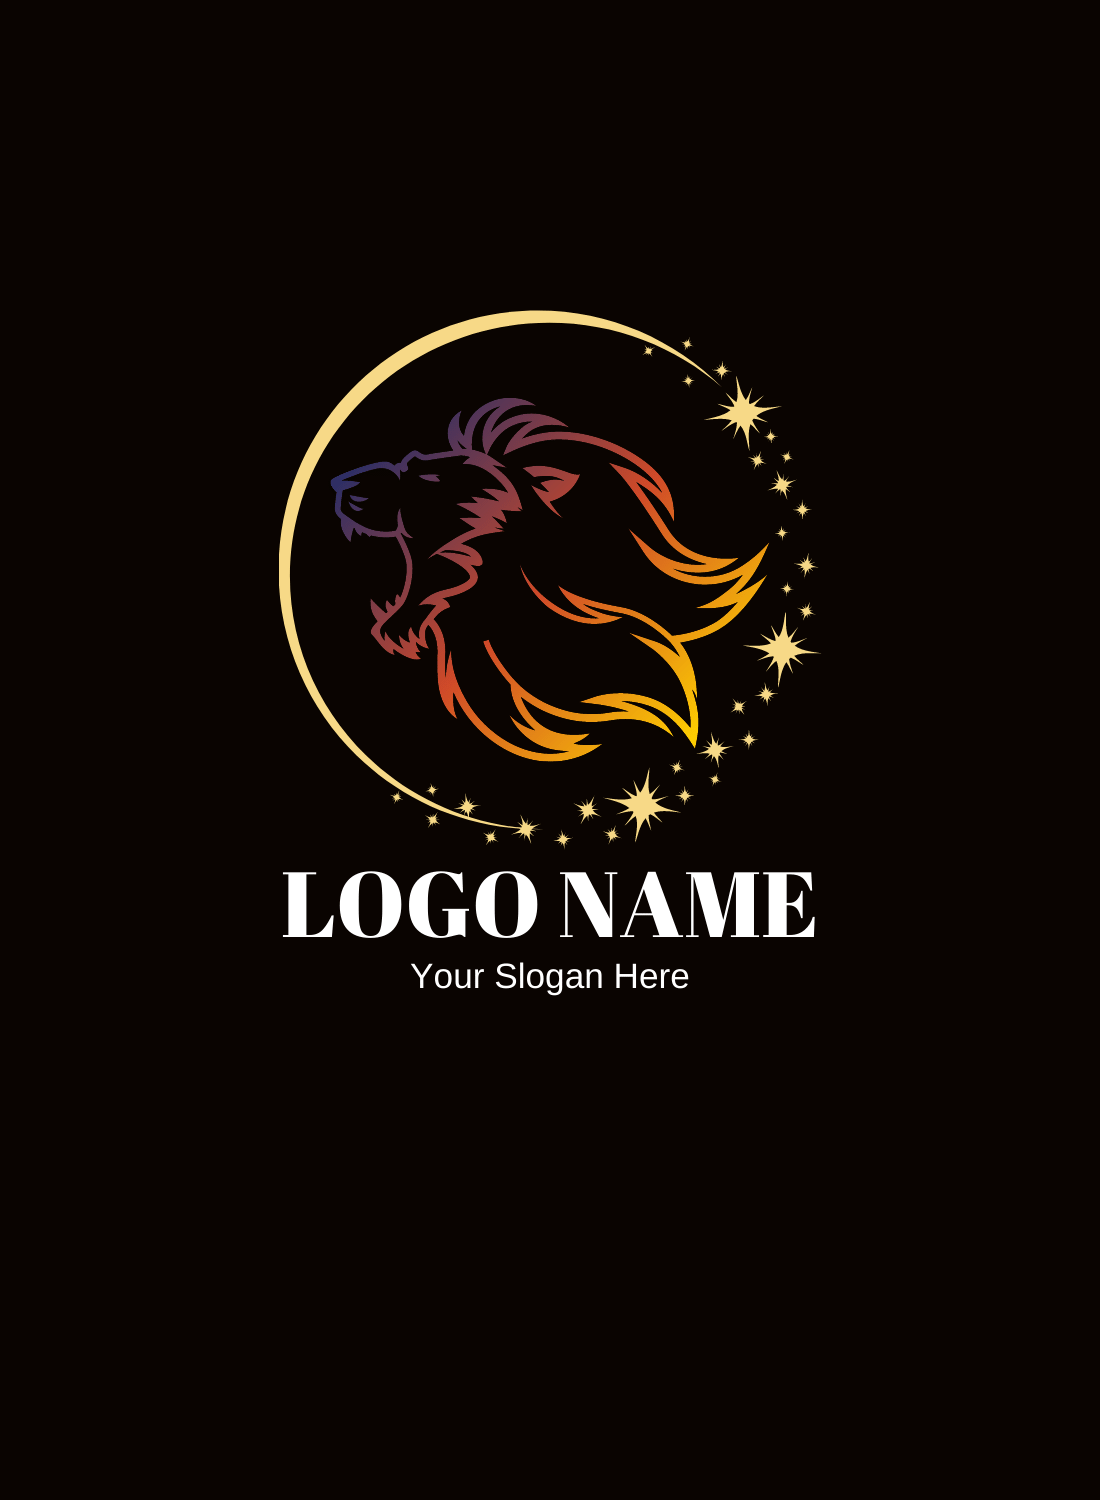 Lion logo with stars on a black background.